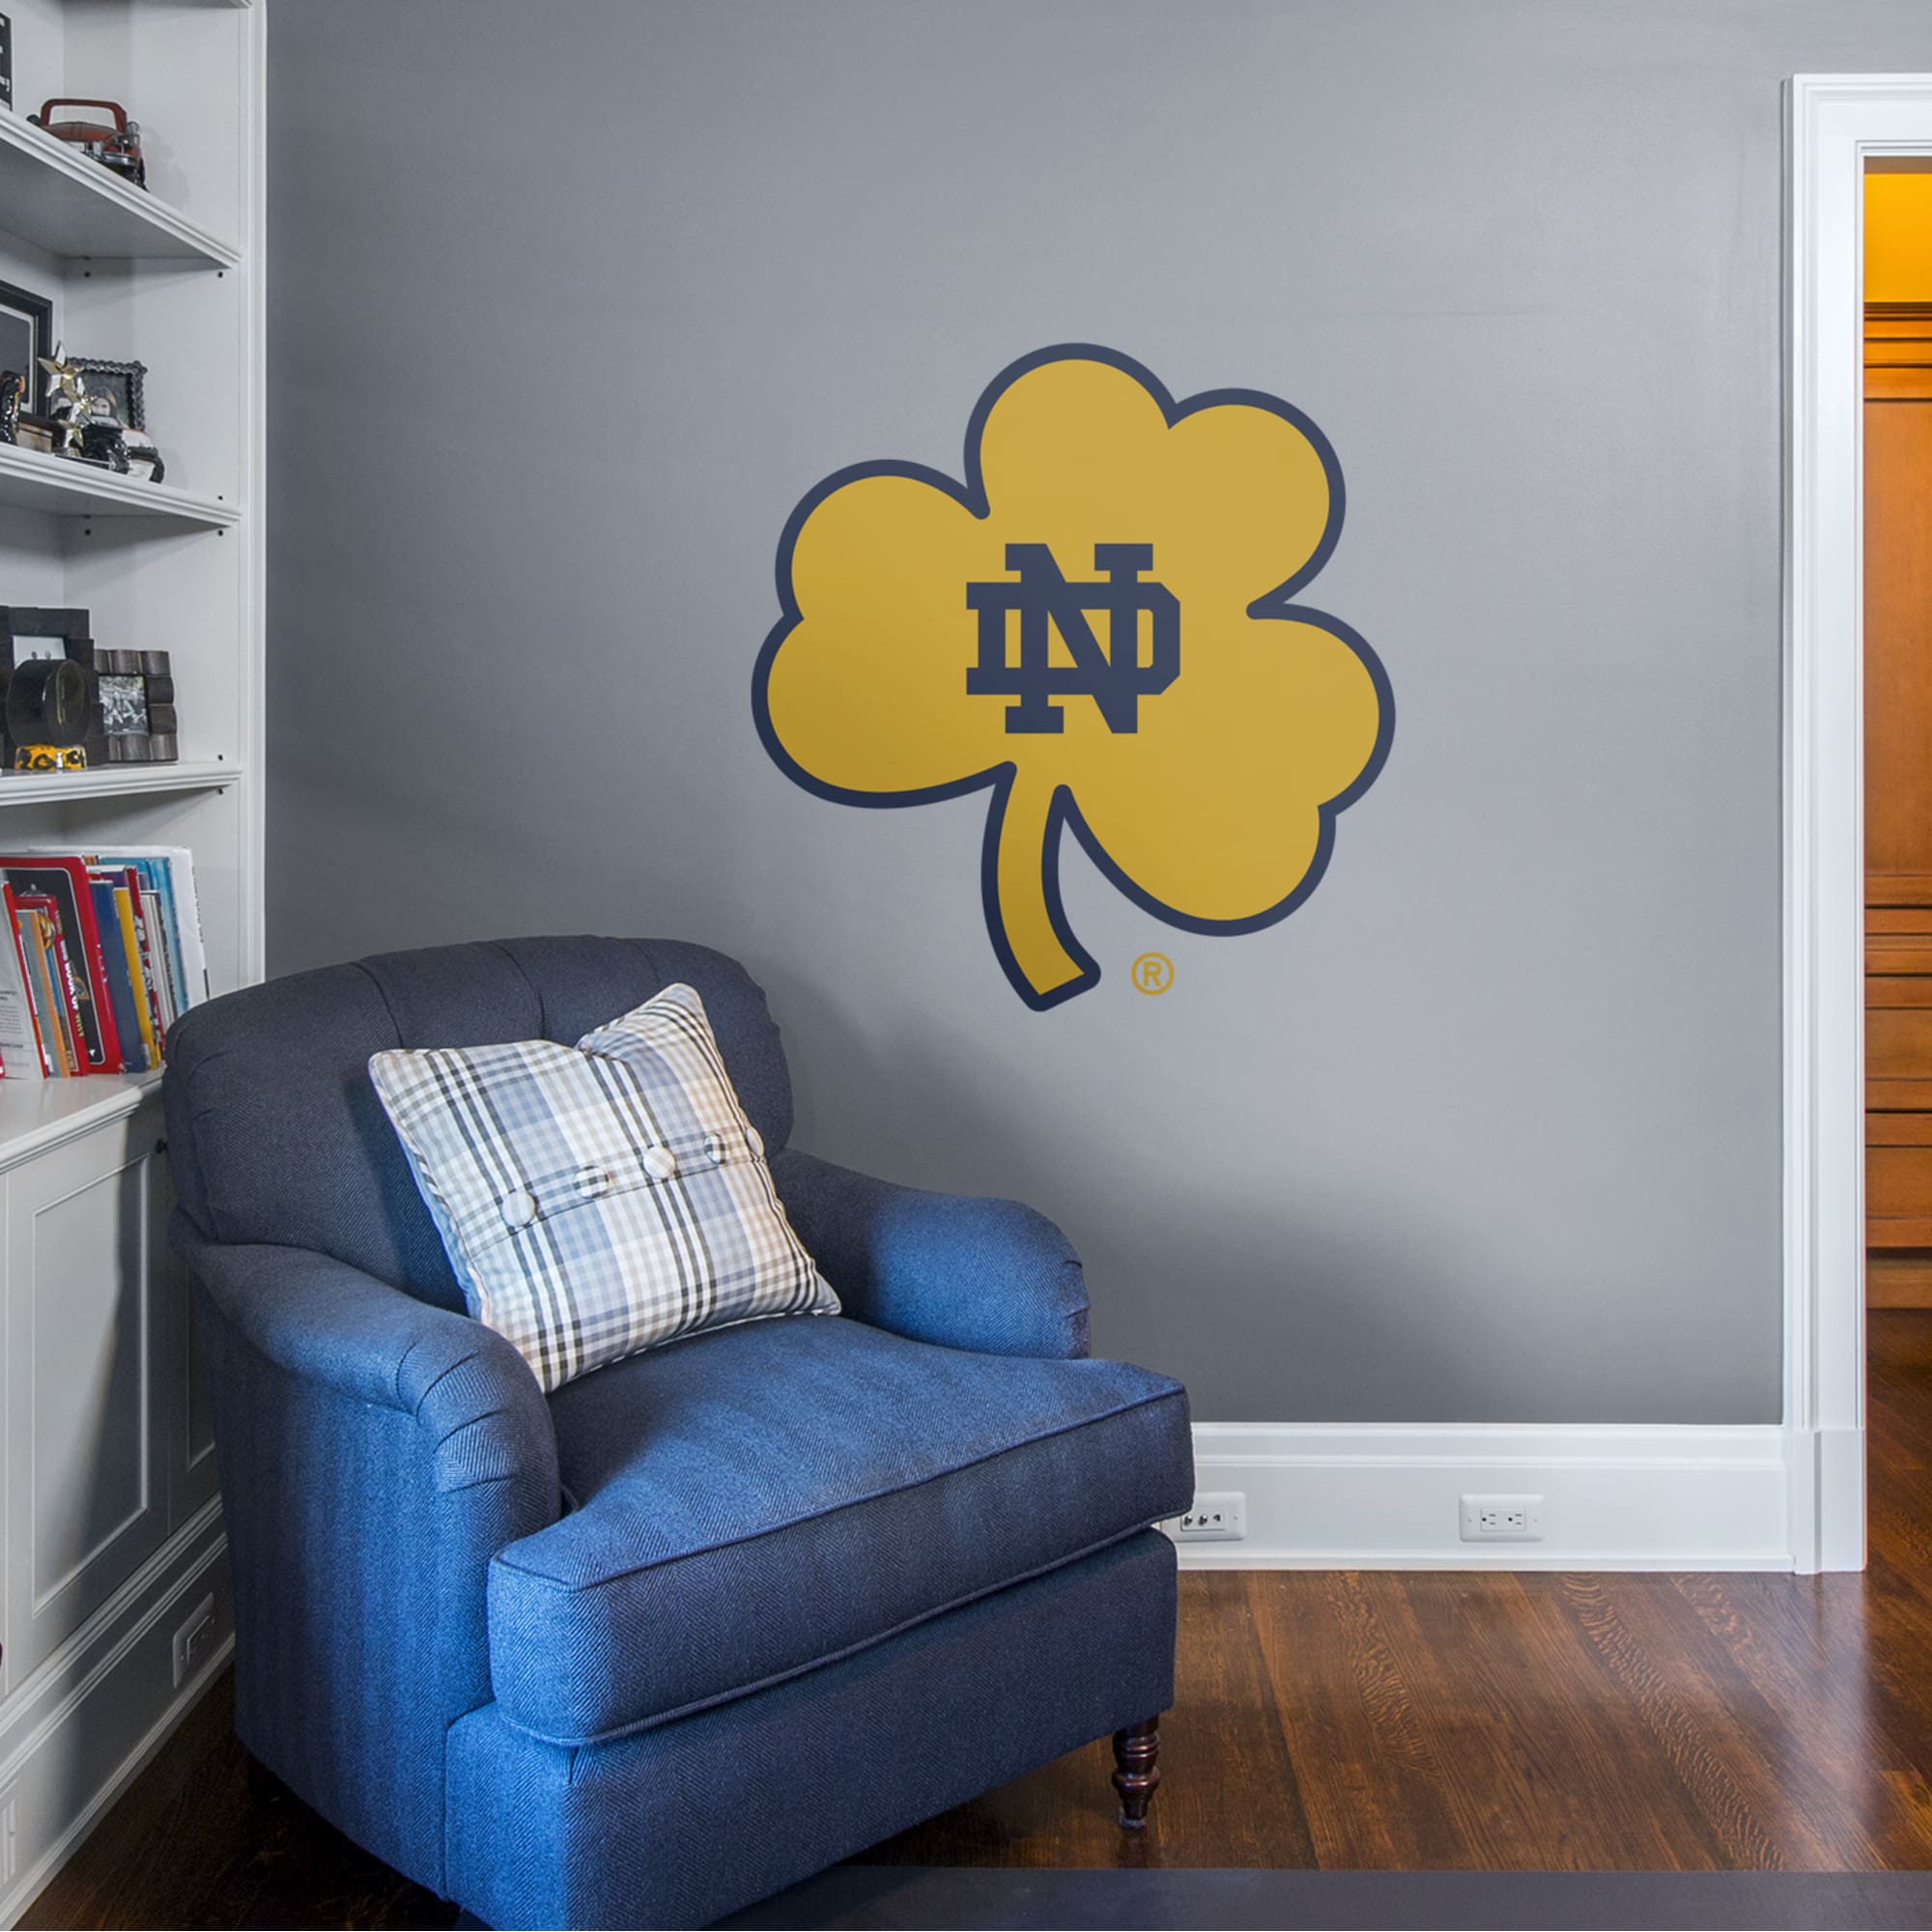 Notre Dame Fighting Irish: ND Shamrock Logo - Officially Licensed Removable Wall Decal 37.0"W x 39.0"H by Fathead | Vinyl